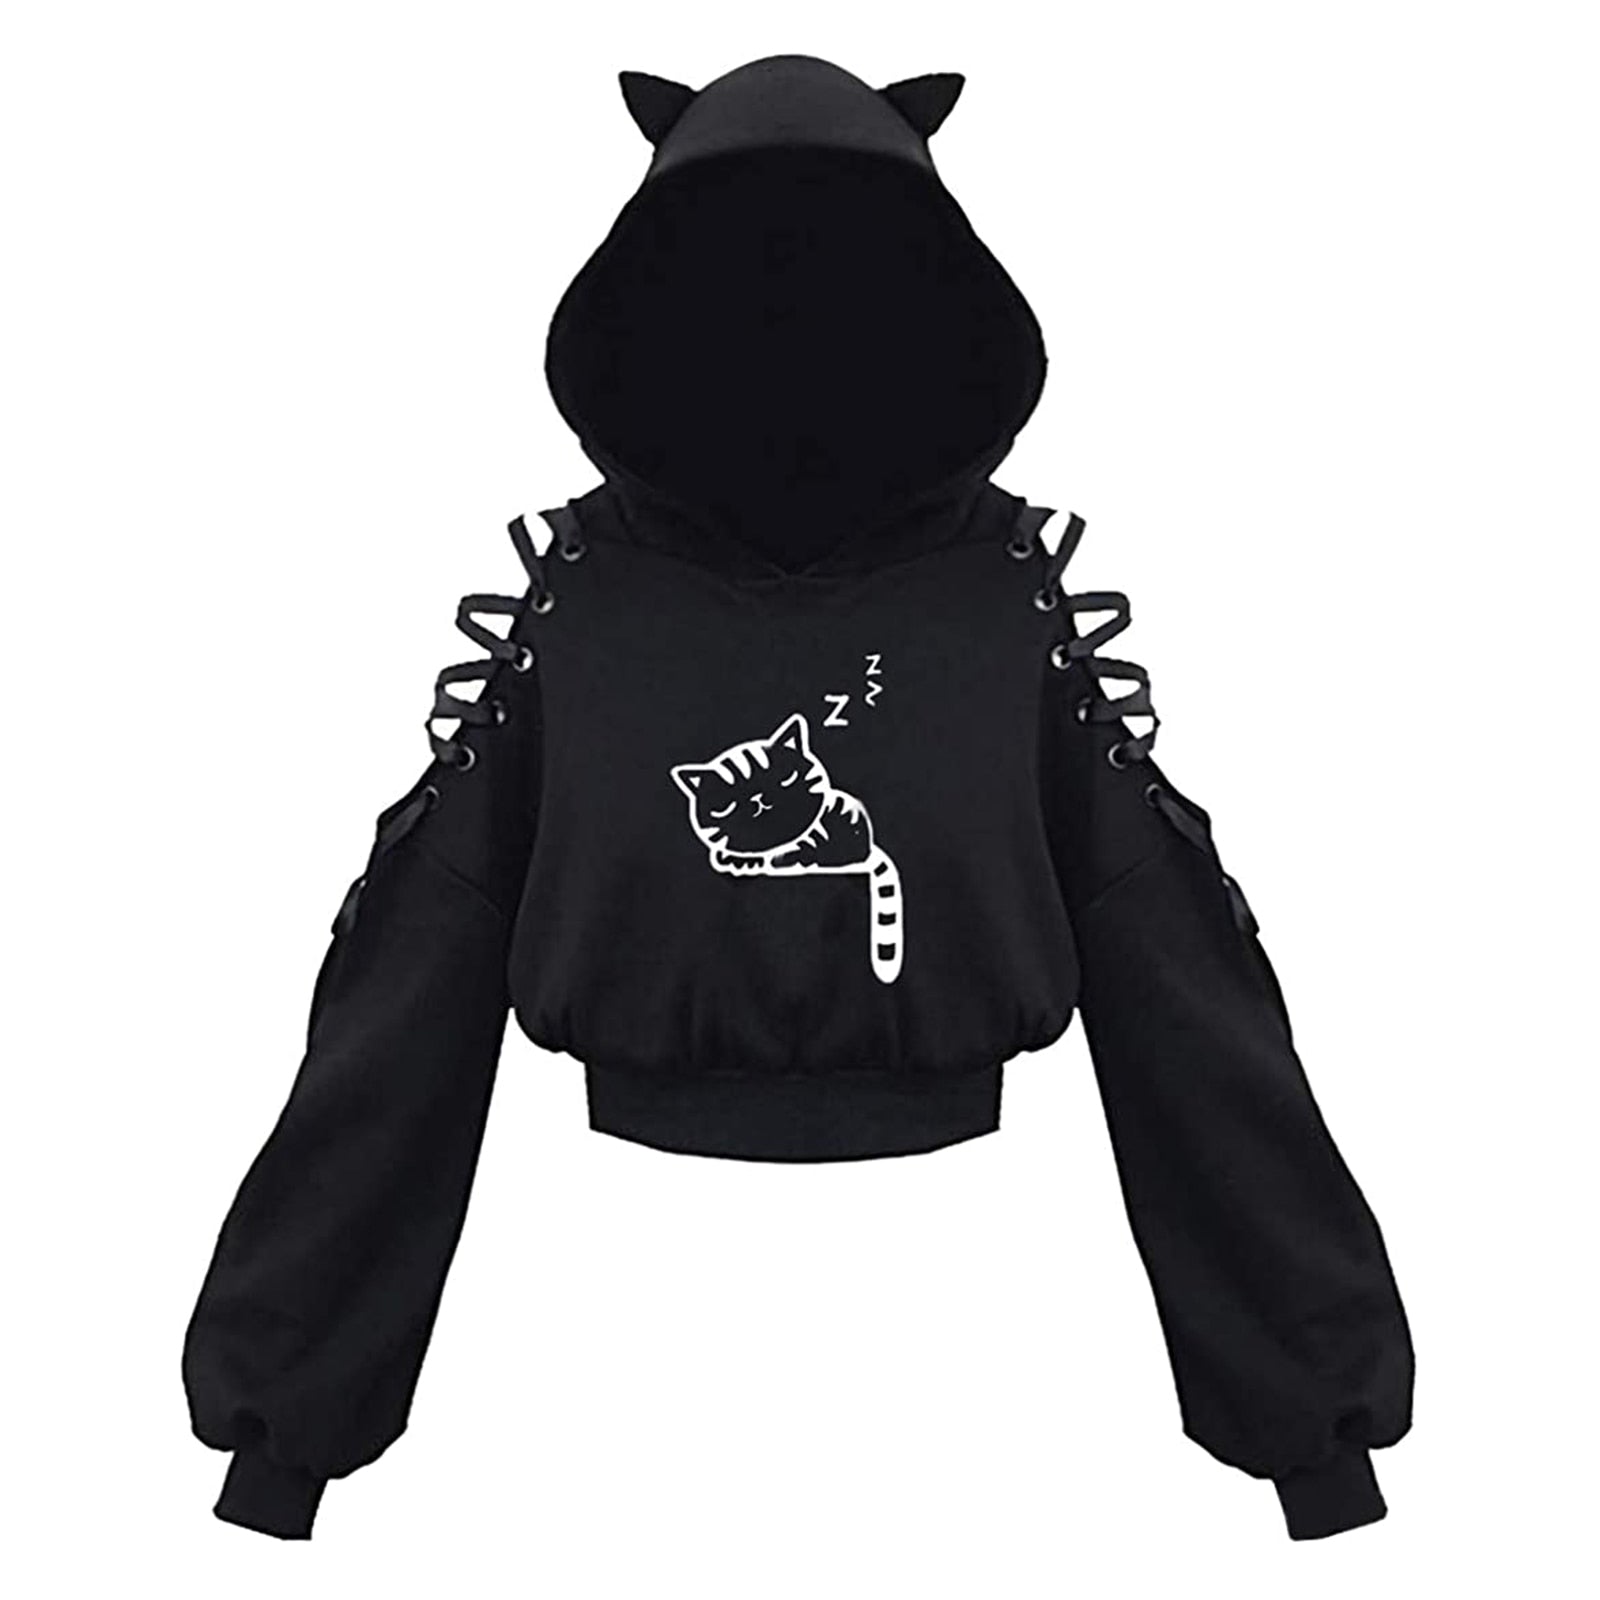 hoodie in black color with a sleeping cat printed on it which looks cute